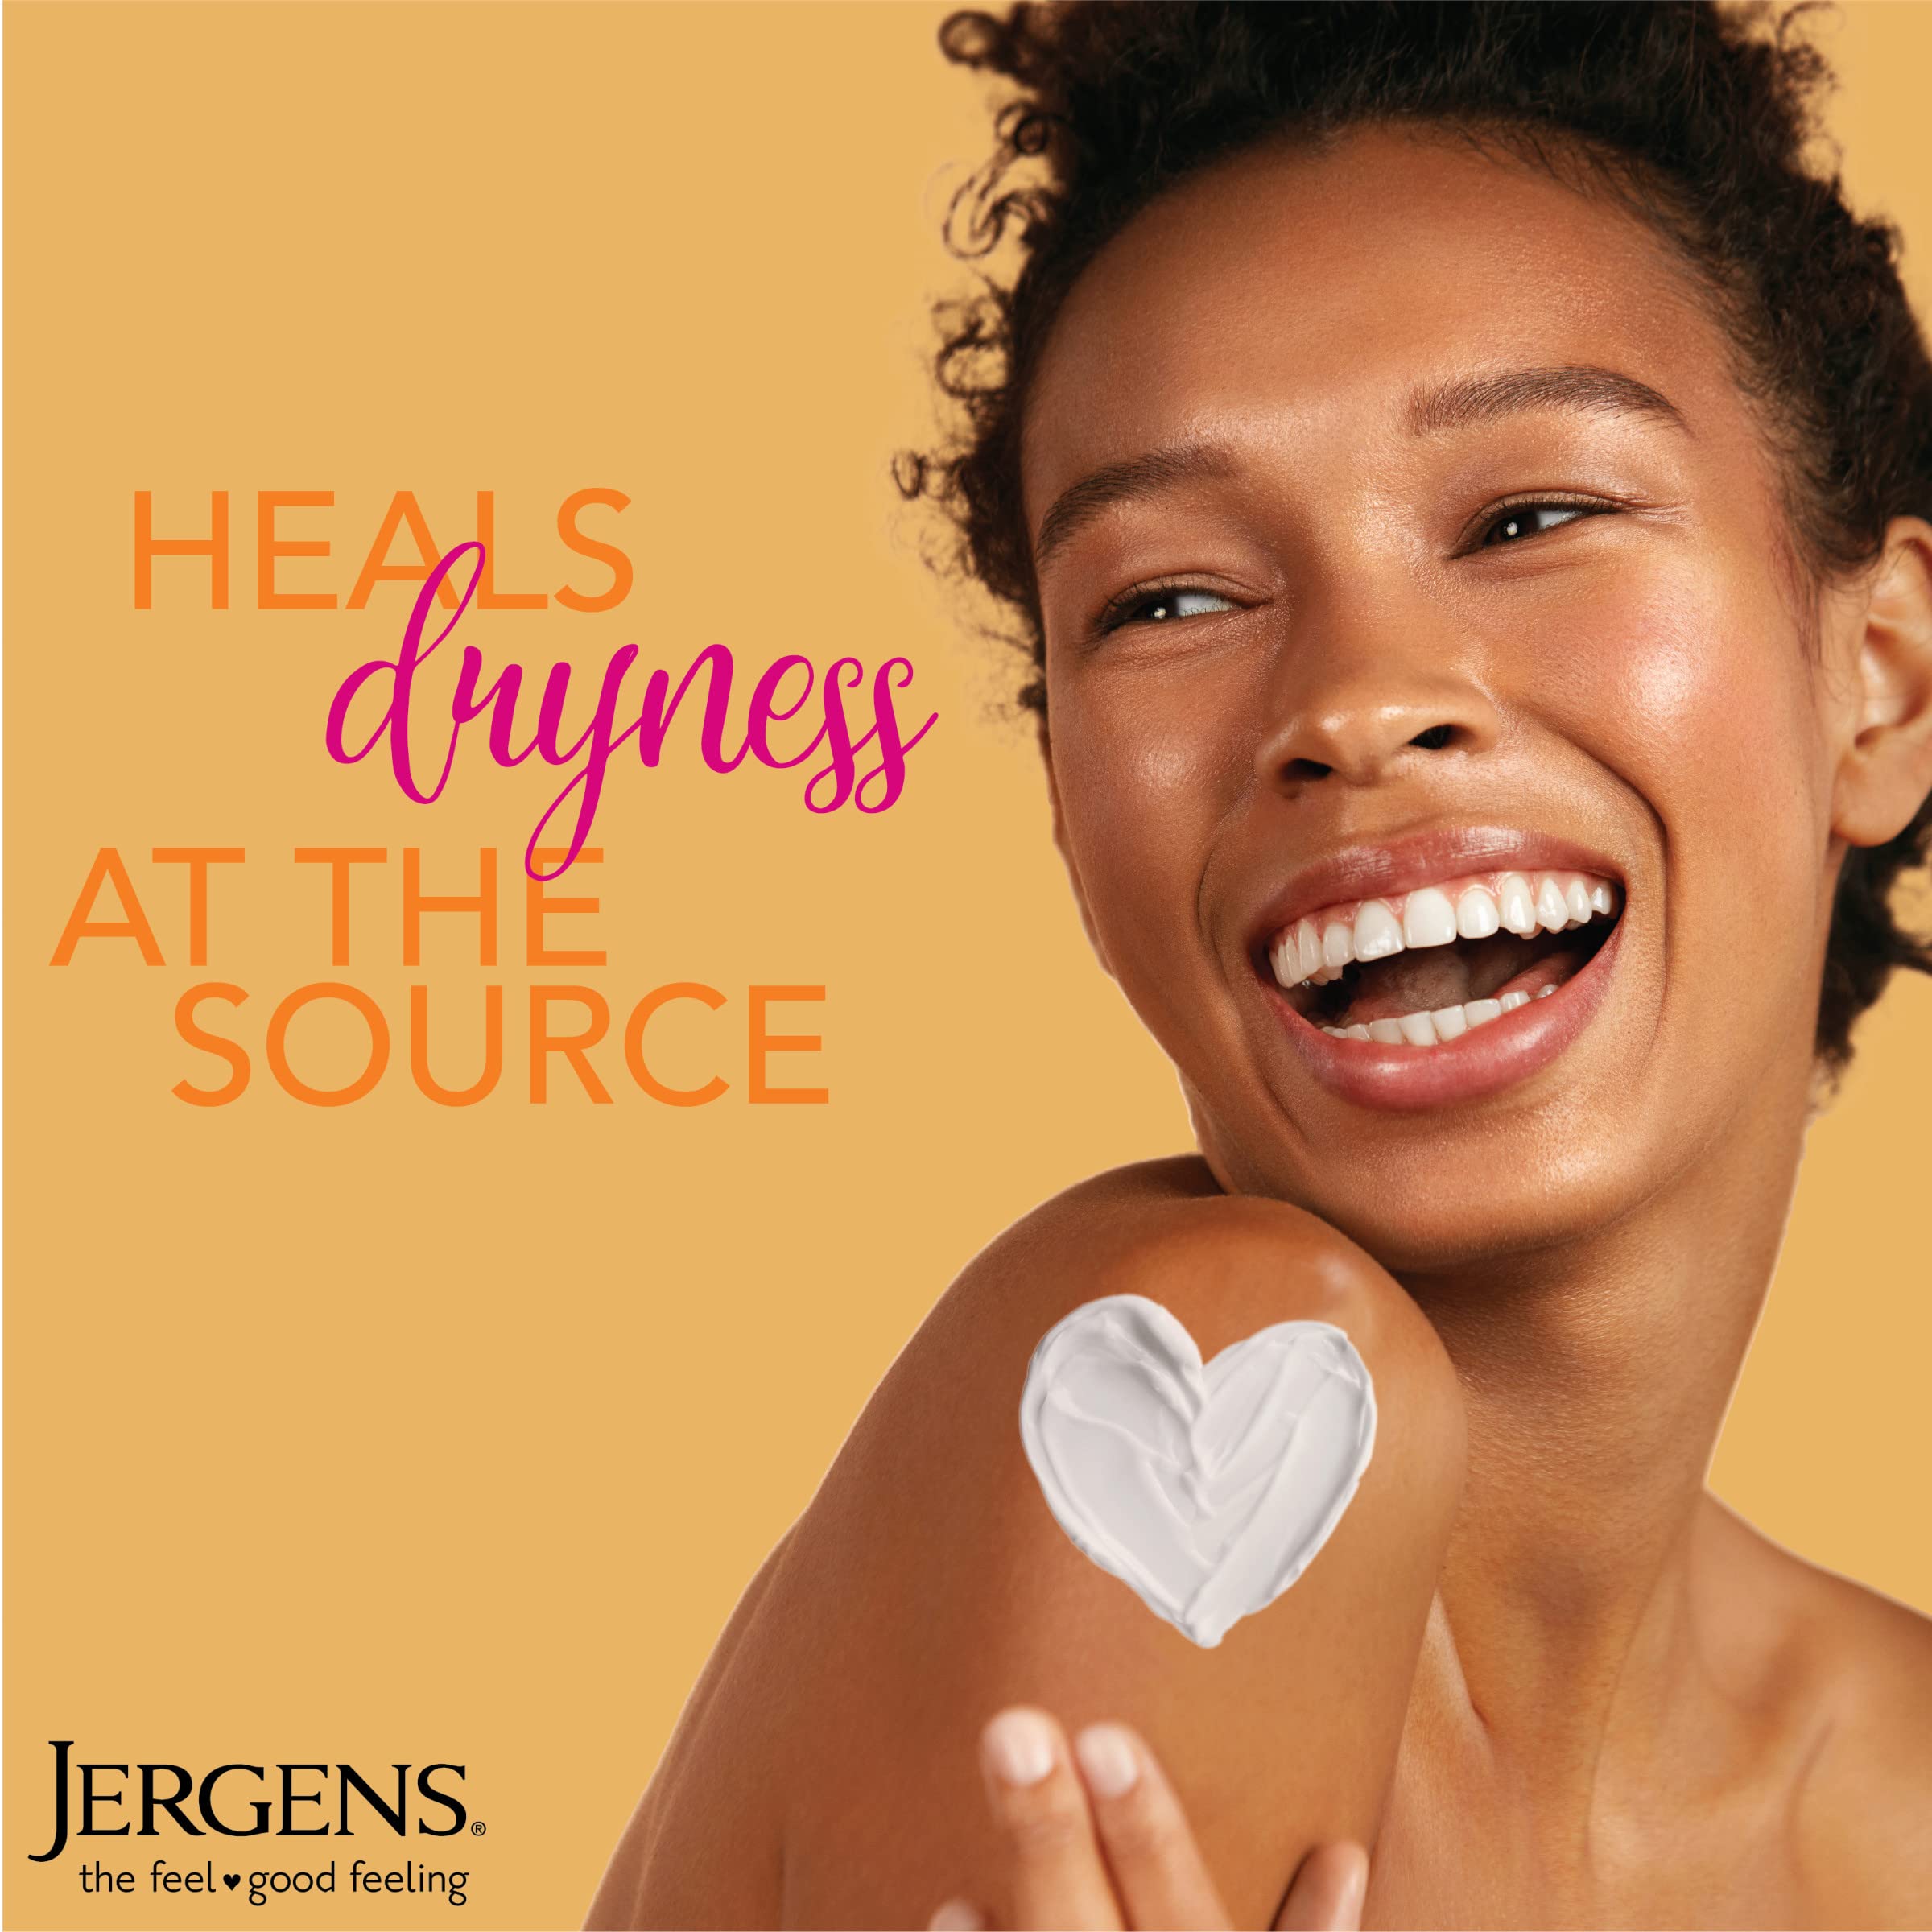 Jergens Ultra Healing Dry Skin Moisturizer, Body and Hand Lotion, for Absorption into Extra Dry Skin, 21 Ounce, with HYDRALUCENCE blend, Vitamins C, E, and B5